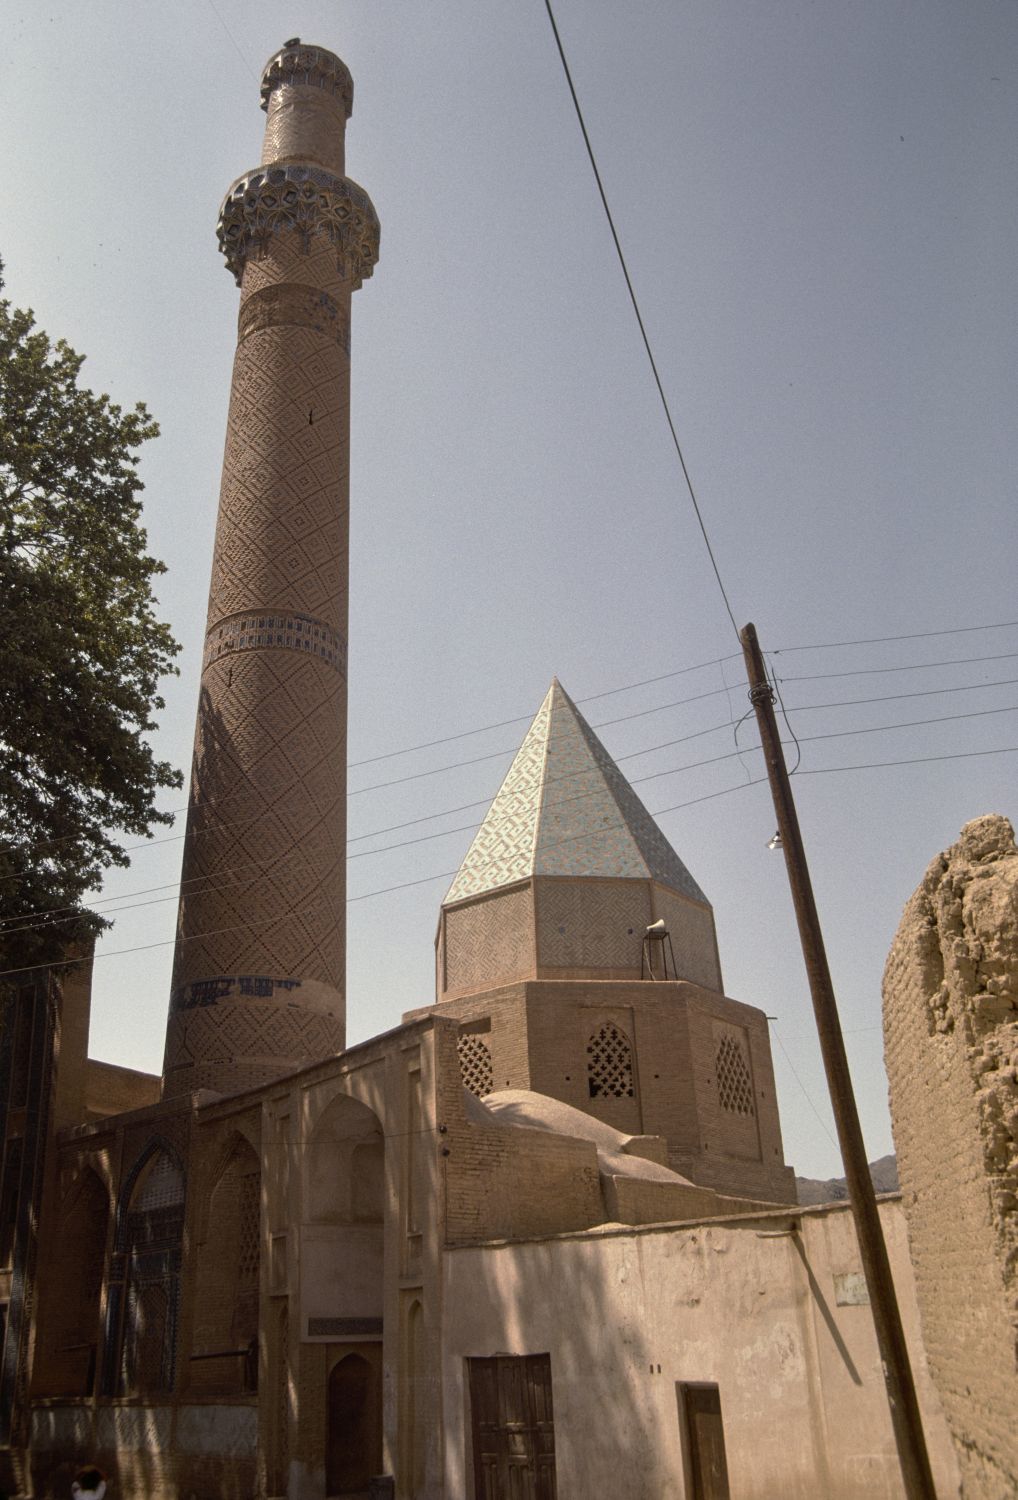 Exterior view of complex from south, showing minaret and conical roof of tomb tower.